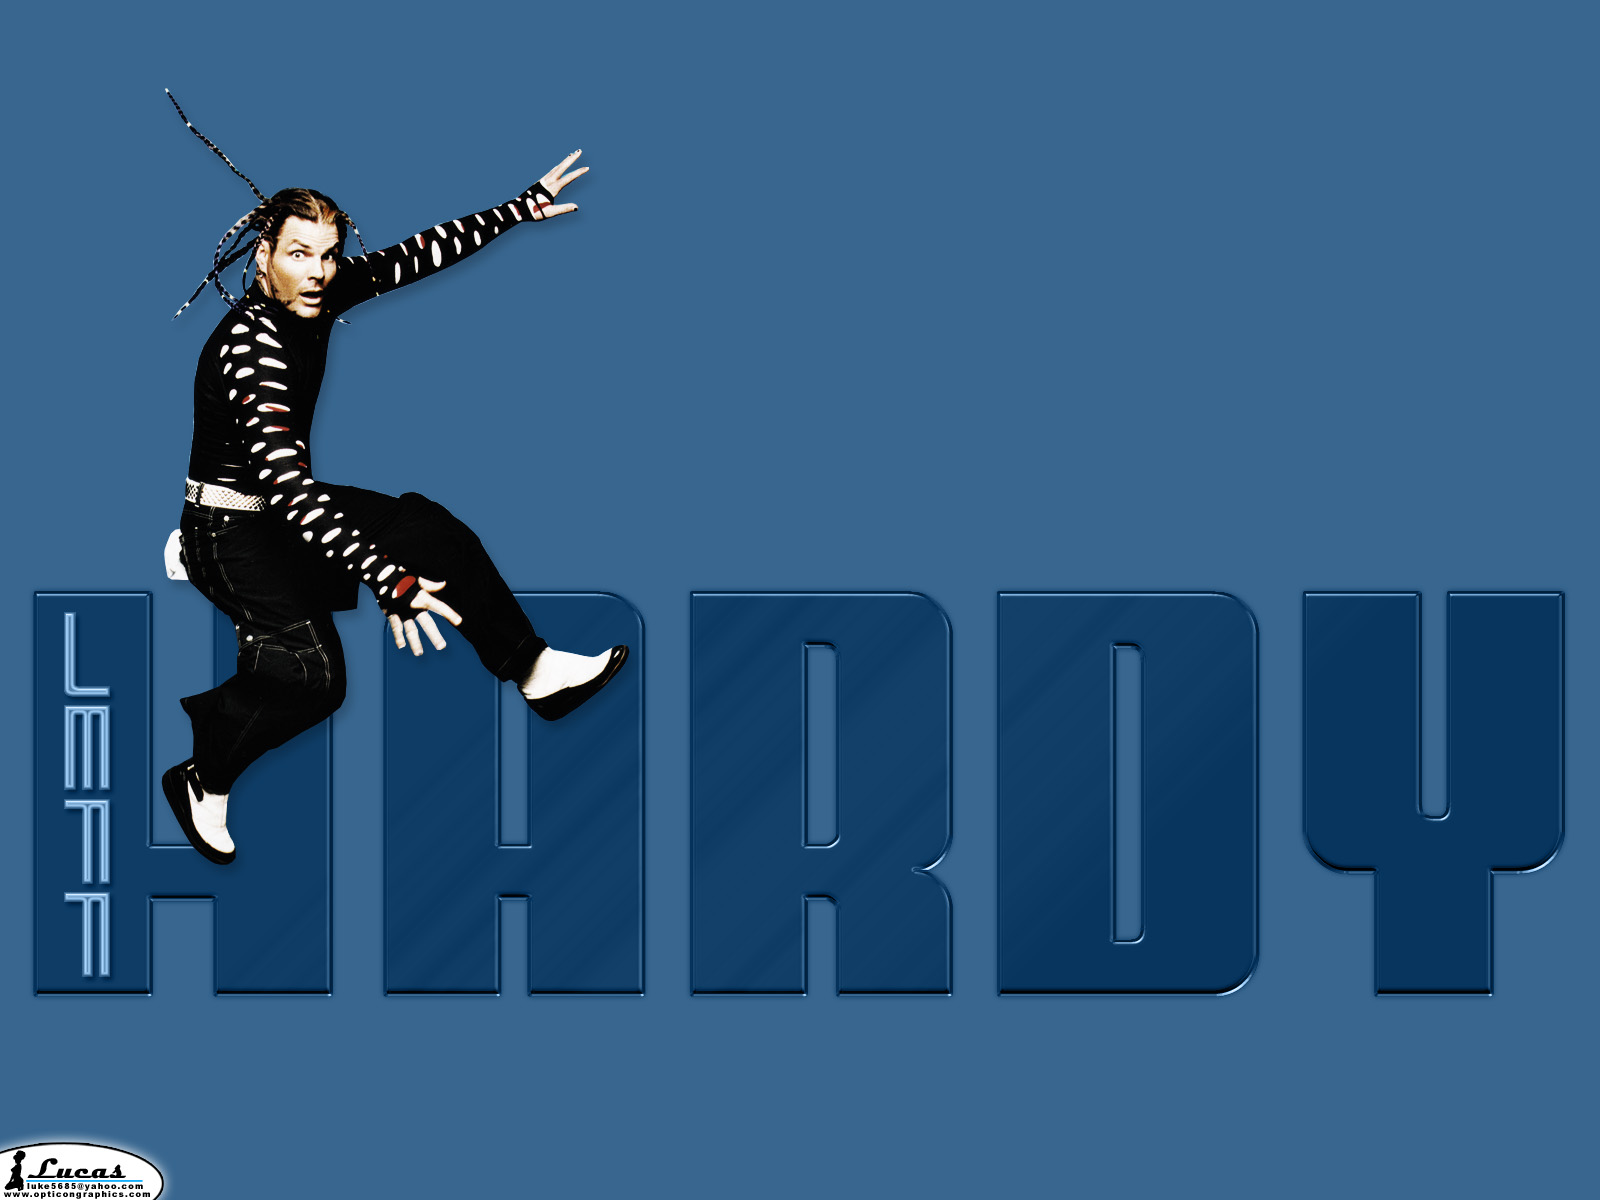 jeff hardy hd wallpaper,album cover,games,graphic design,jumping,t shirt